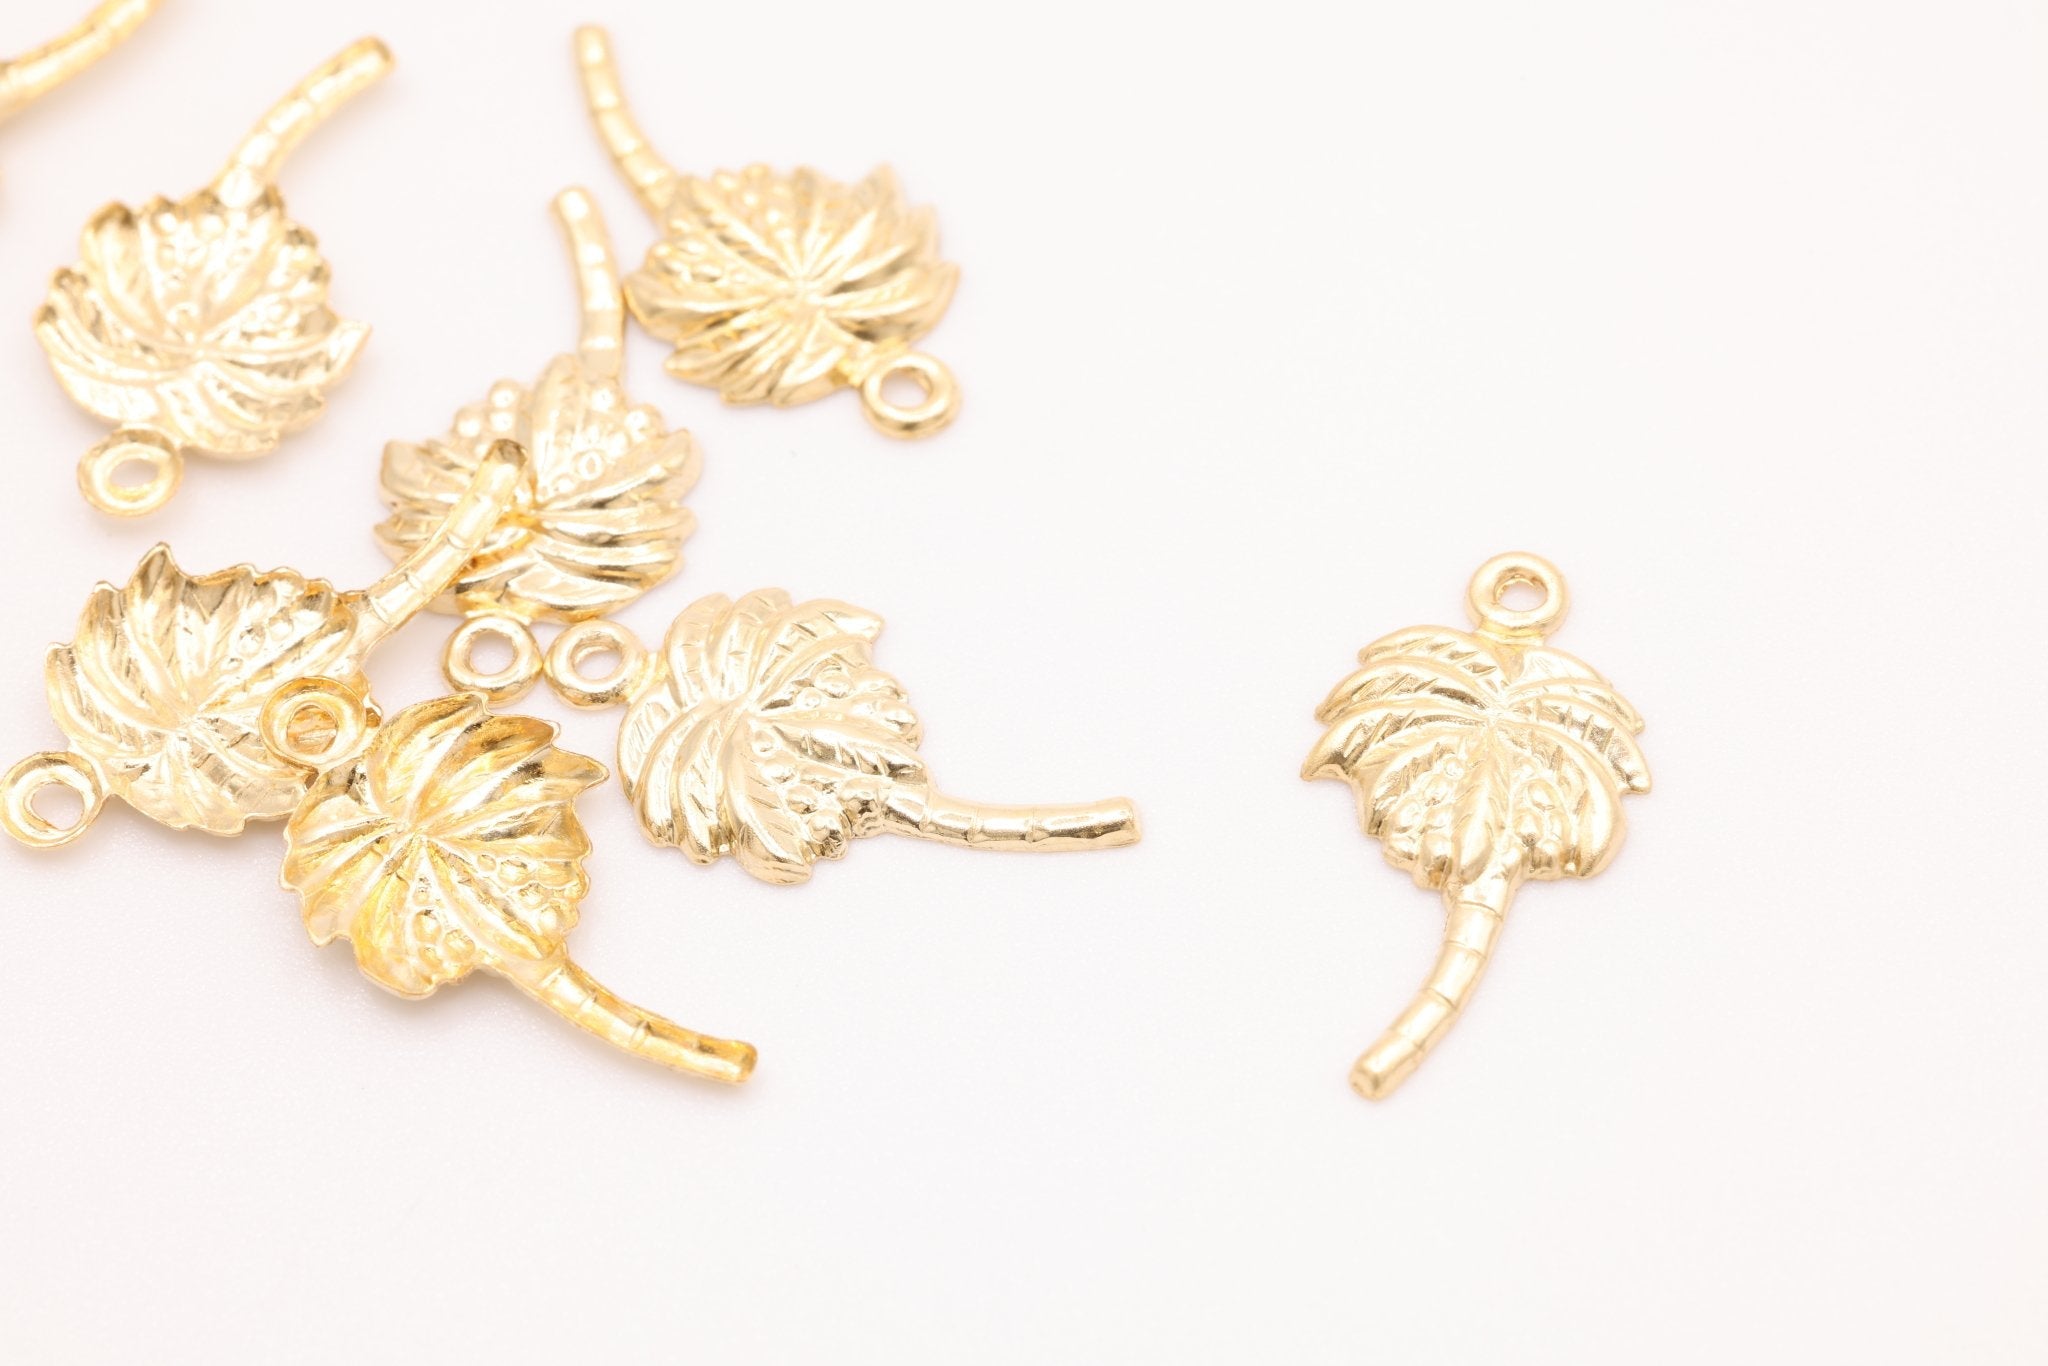 14K Gold-Filled Palm Tree Charm, Drop Tropical Island Charm, Wholesale Jewelry Making Charm - HarperCrown